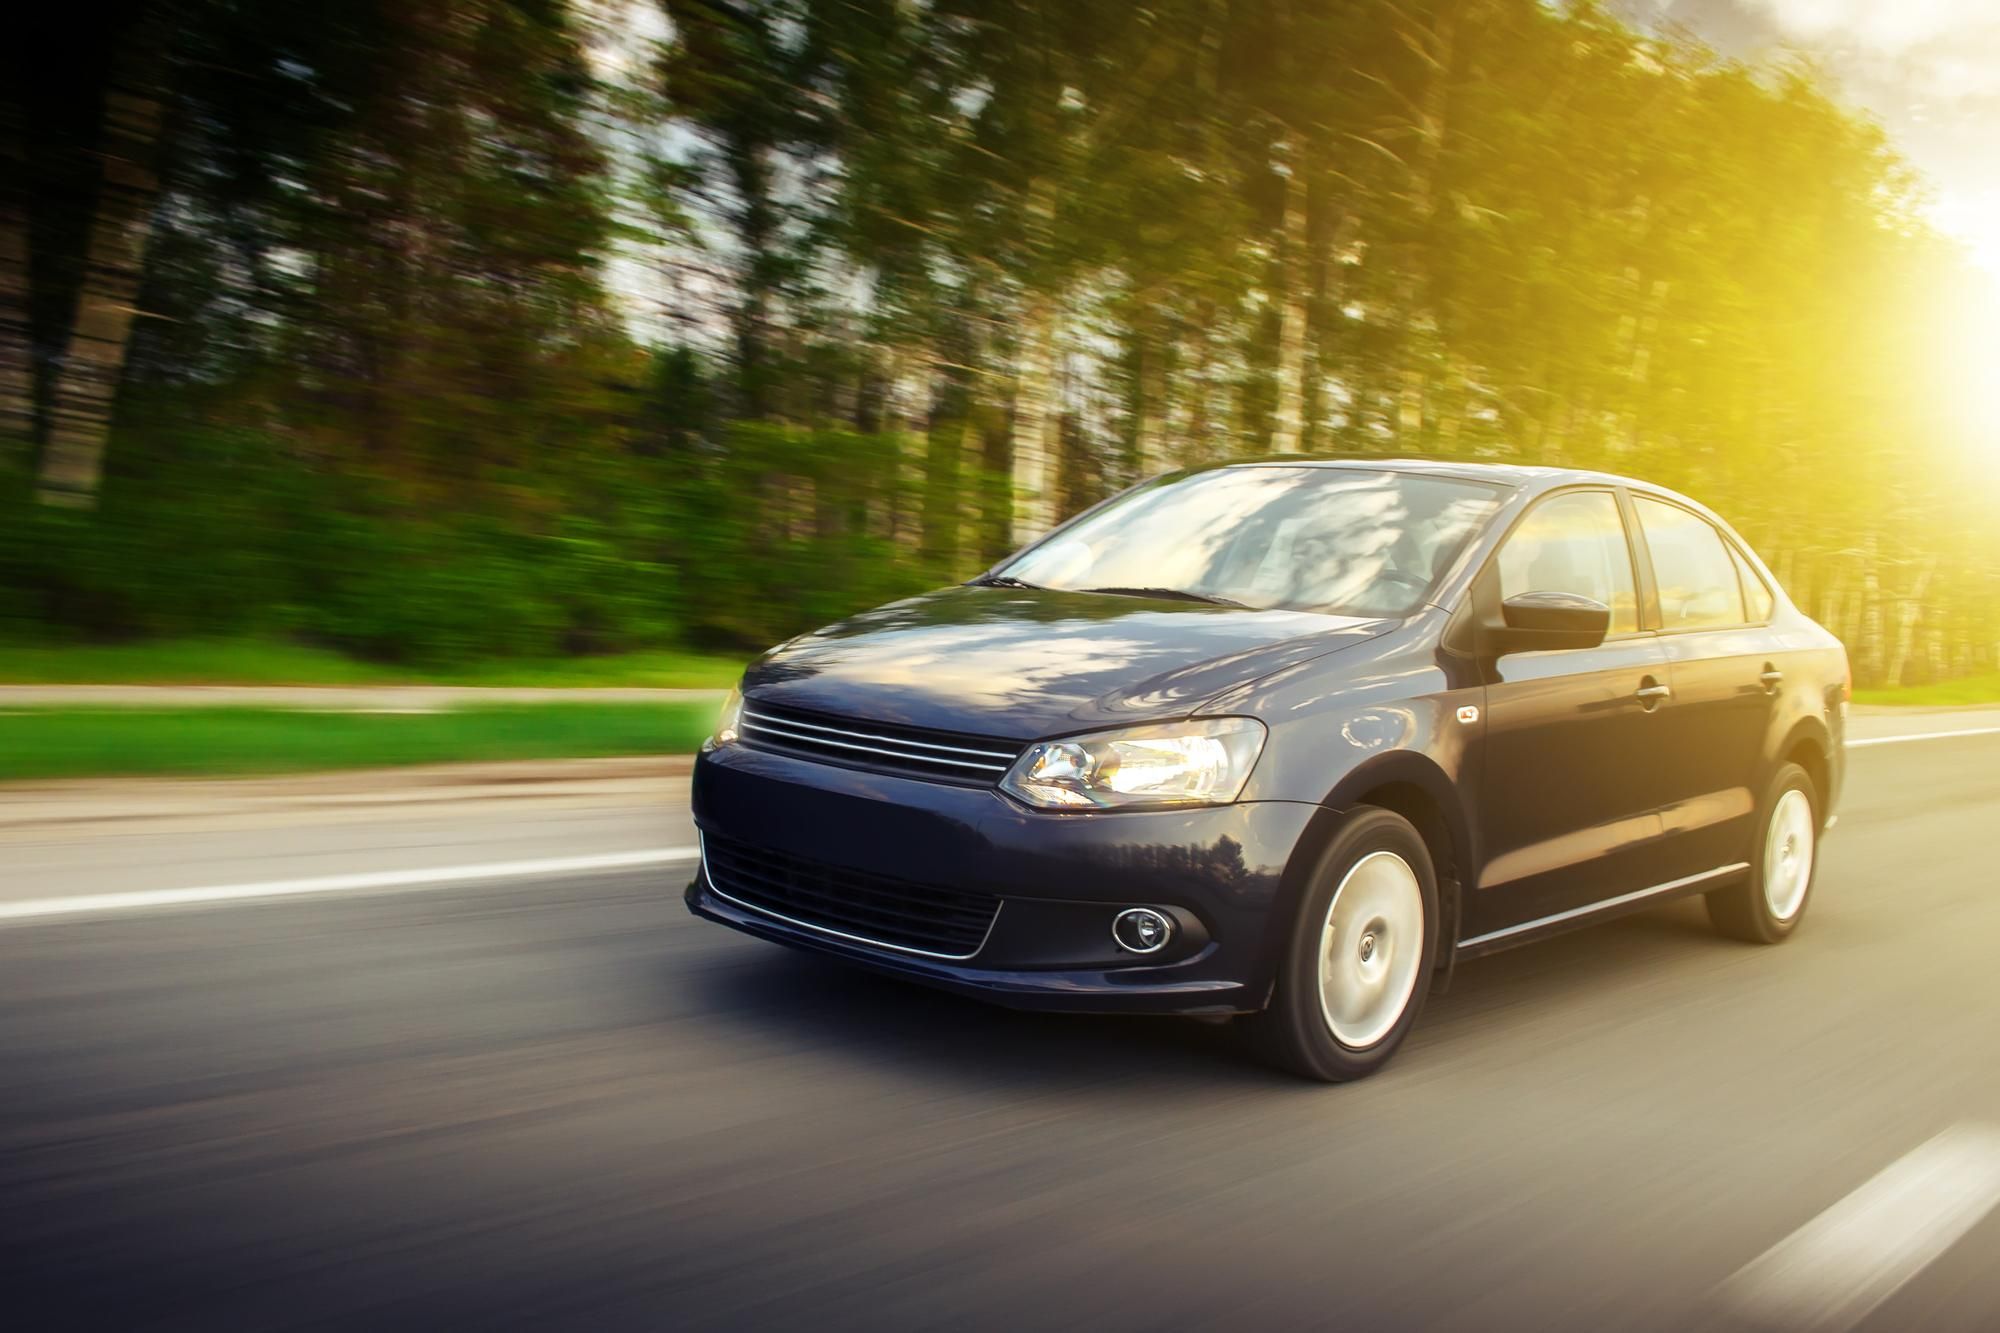 What is a Volkswagen TSI engine?